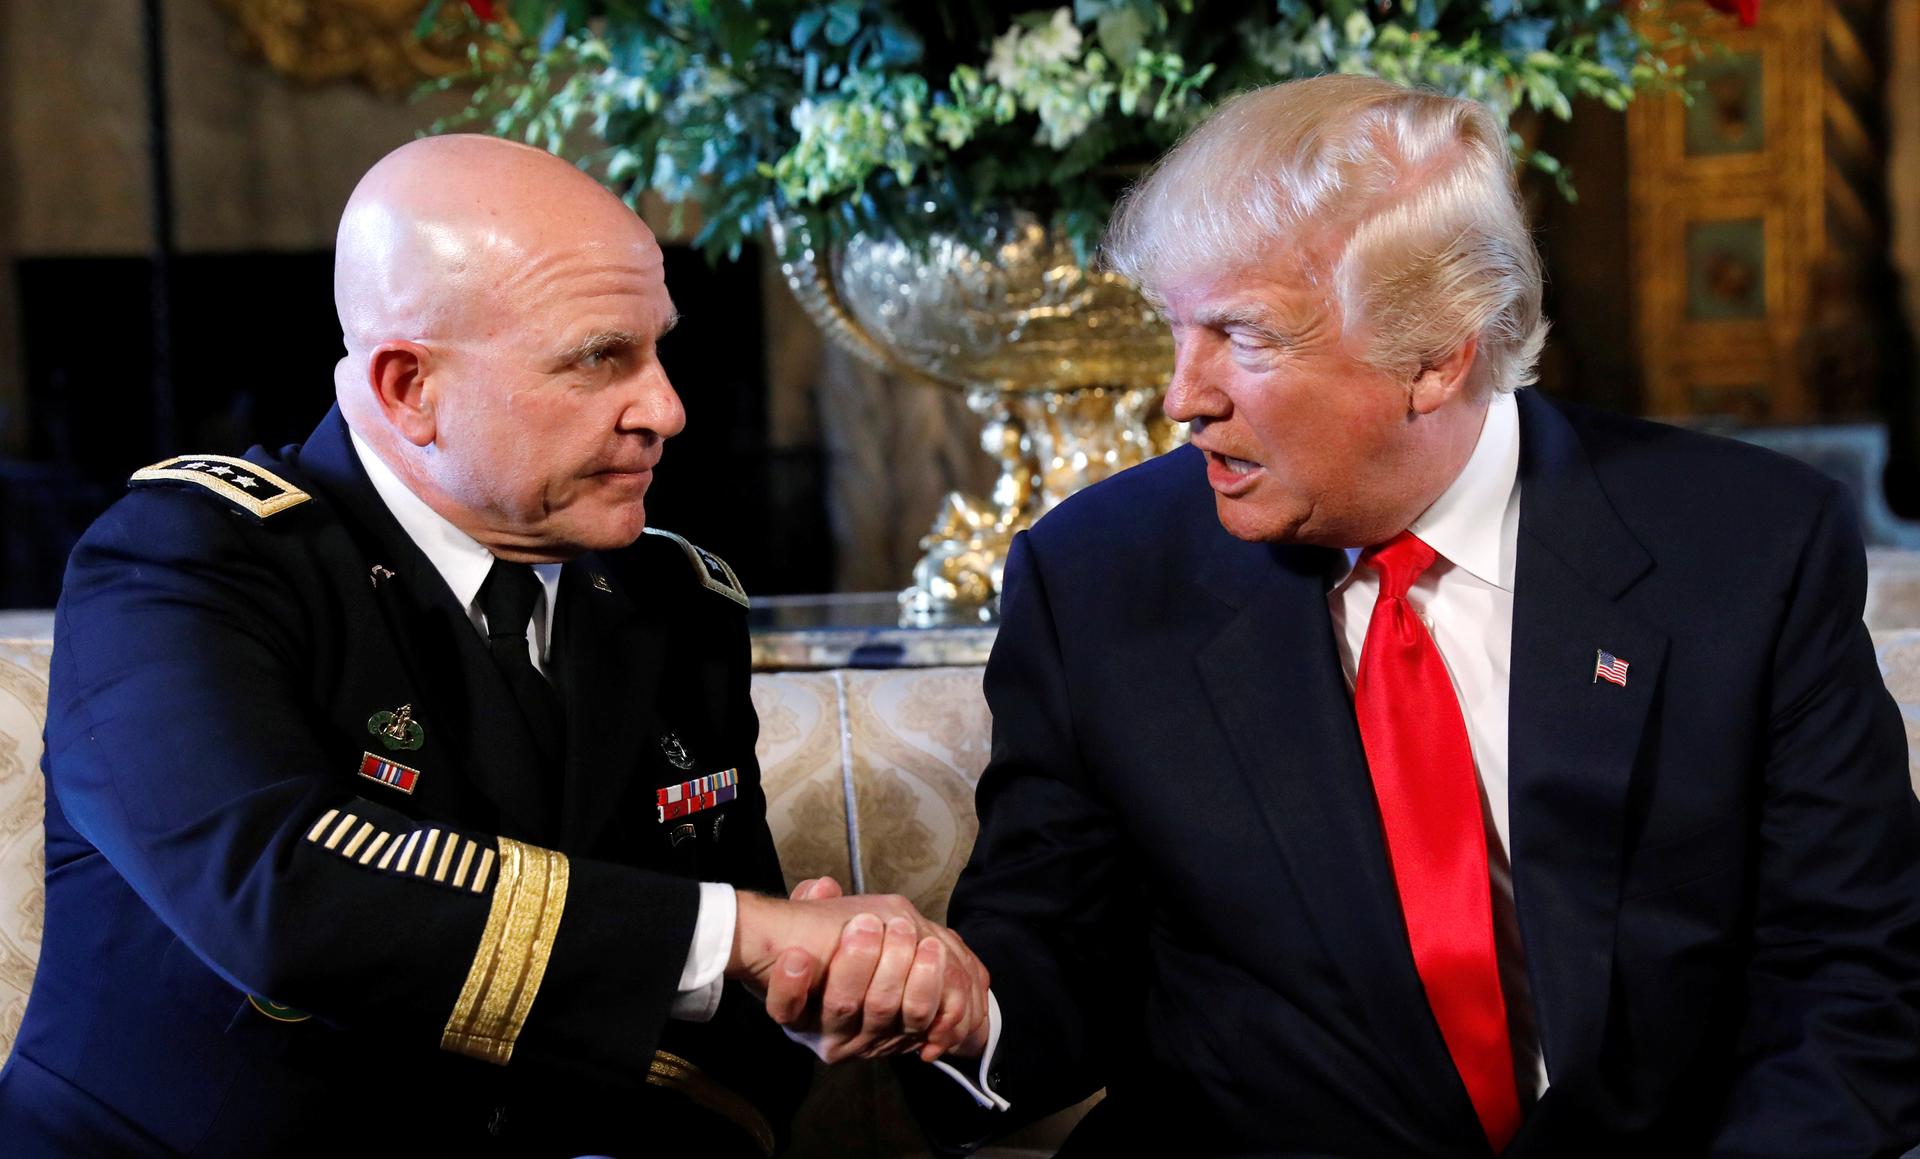 HR McMaster meeting with President Trump, Monday